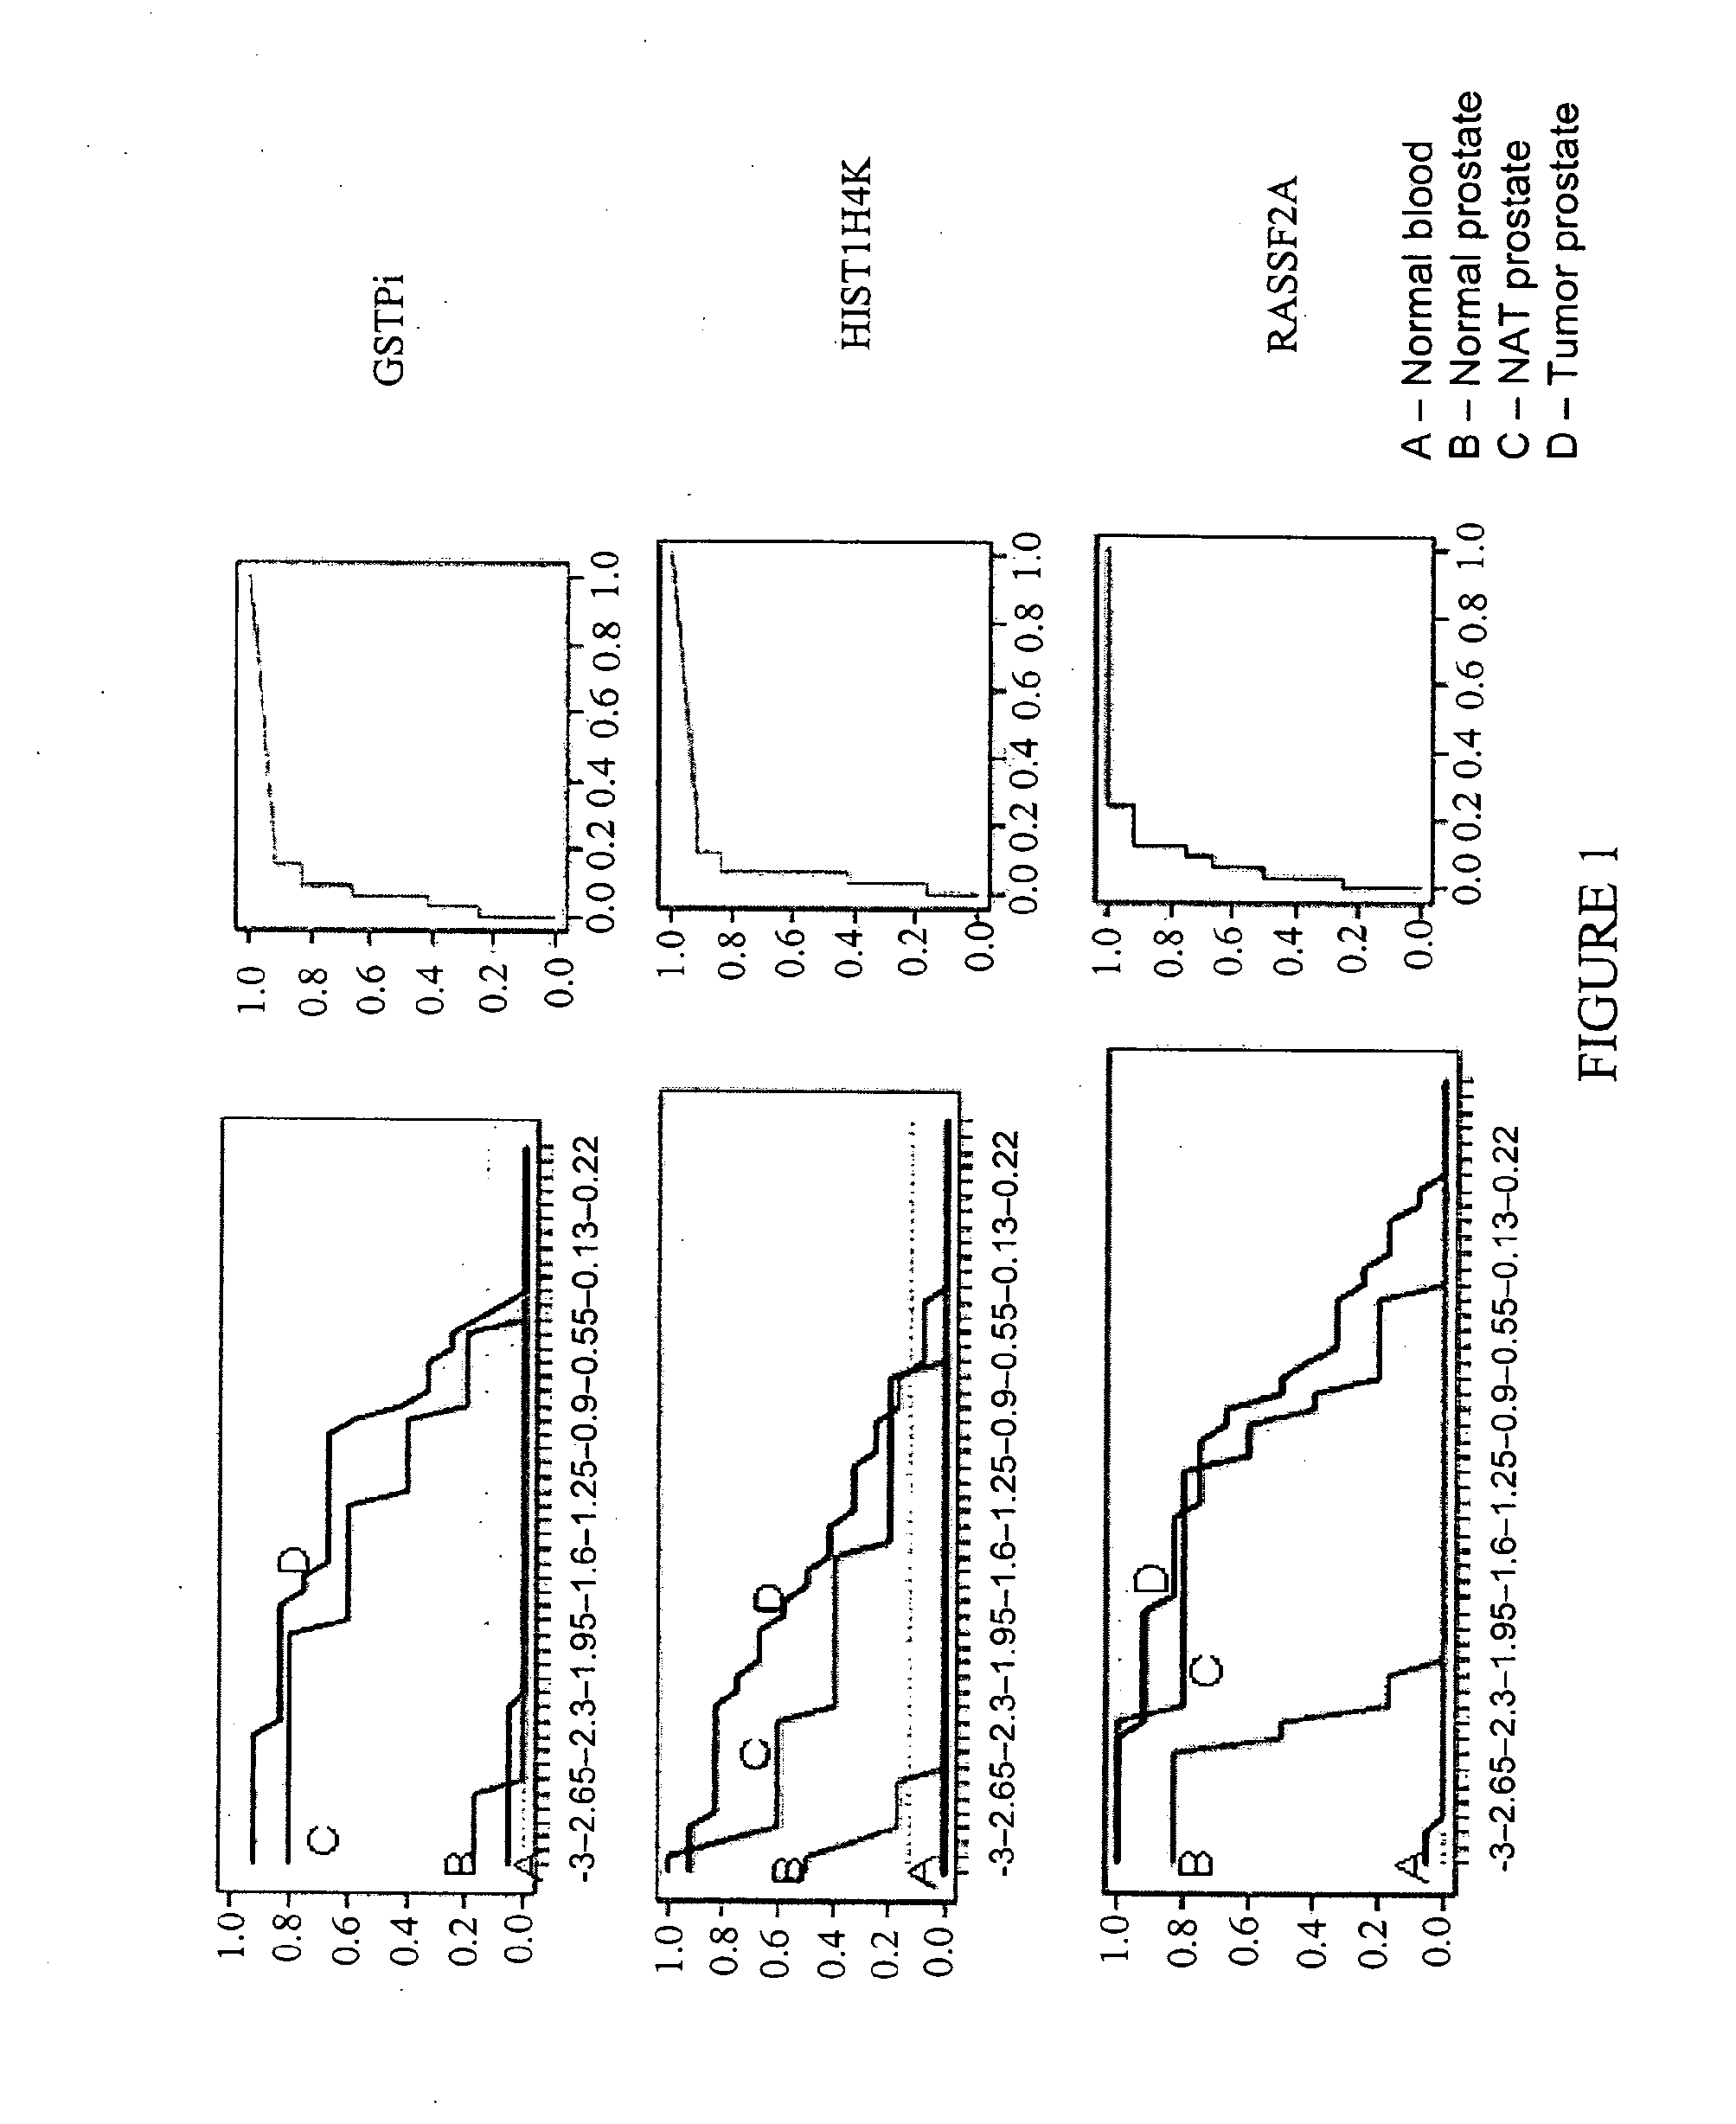 Methods and nucleic acids for the analysis of gene expression associated with the development of prostate cell proliferative disorders